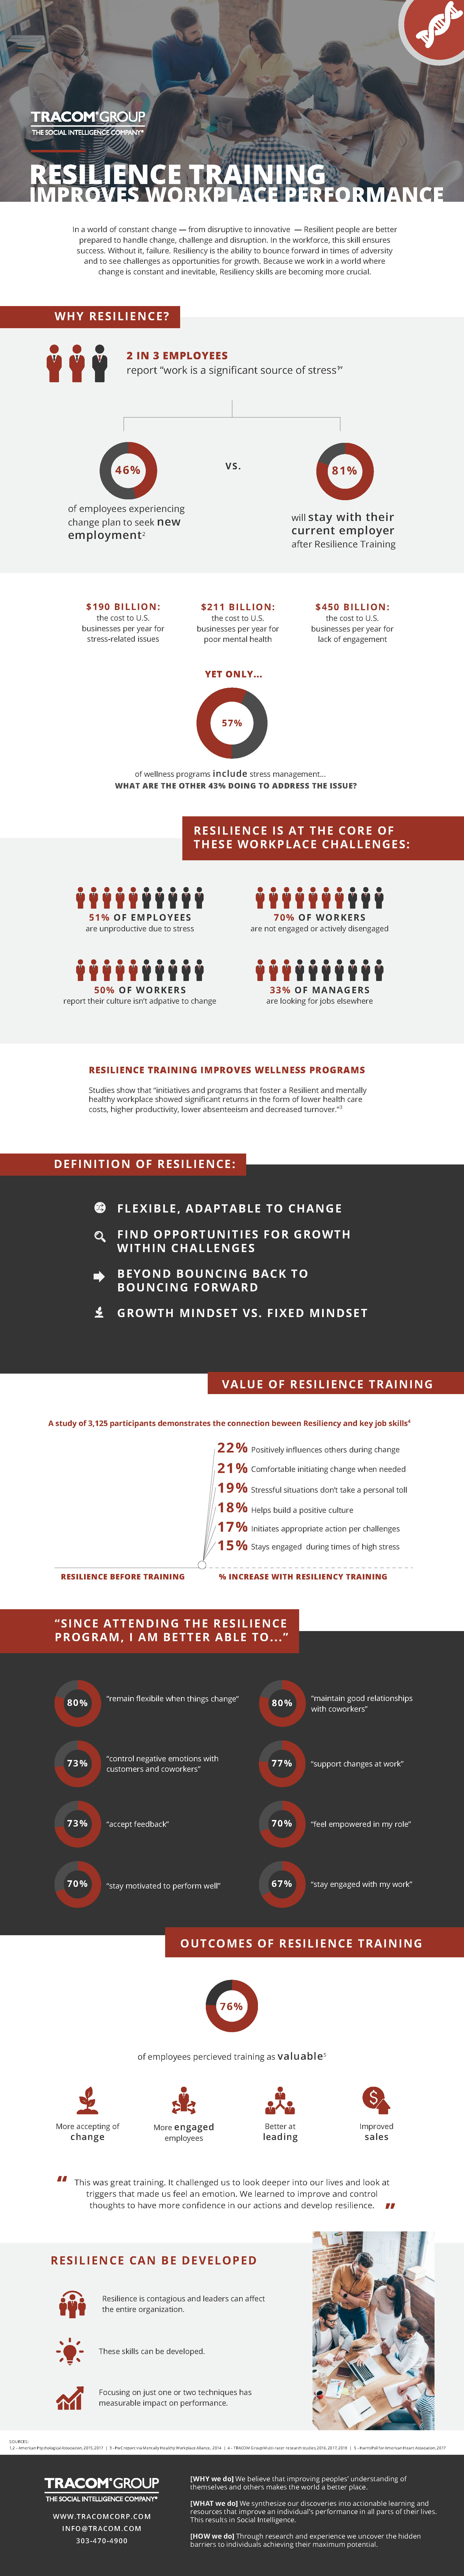 Infographic: Resilience Training Improves Workplace Performance